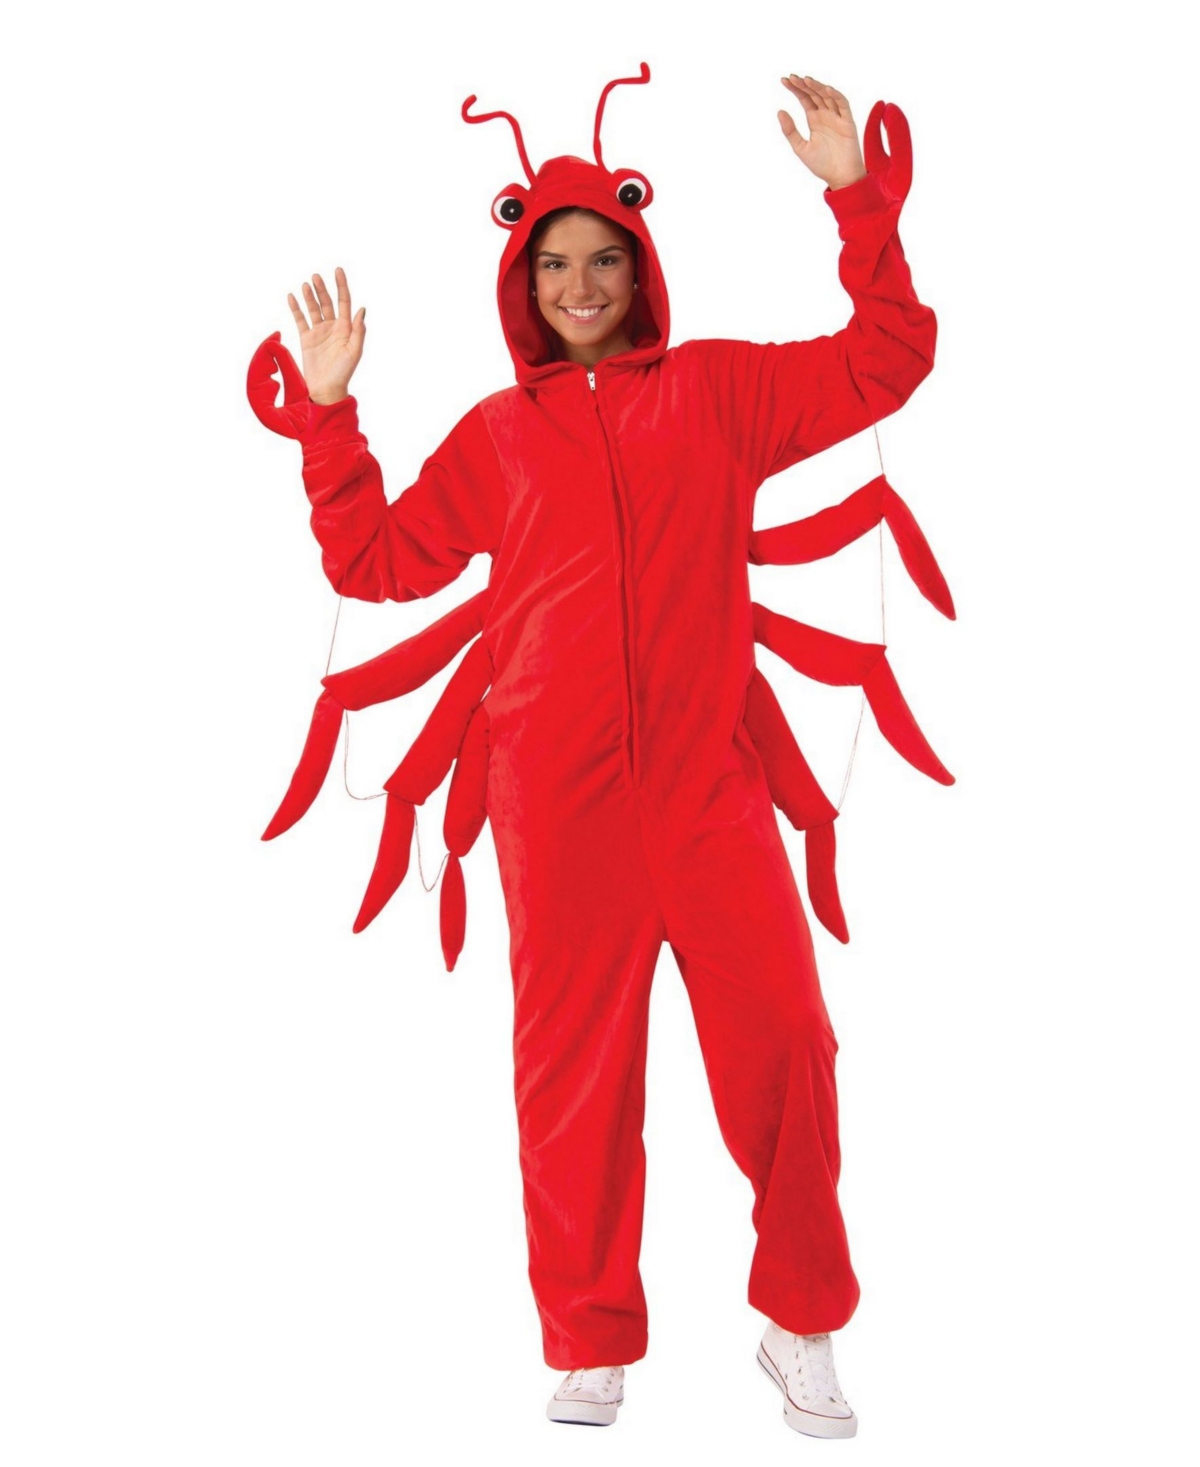 Lobster Comfy Wear Adult Costume - Red